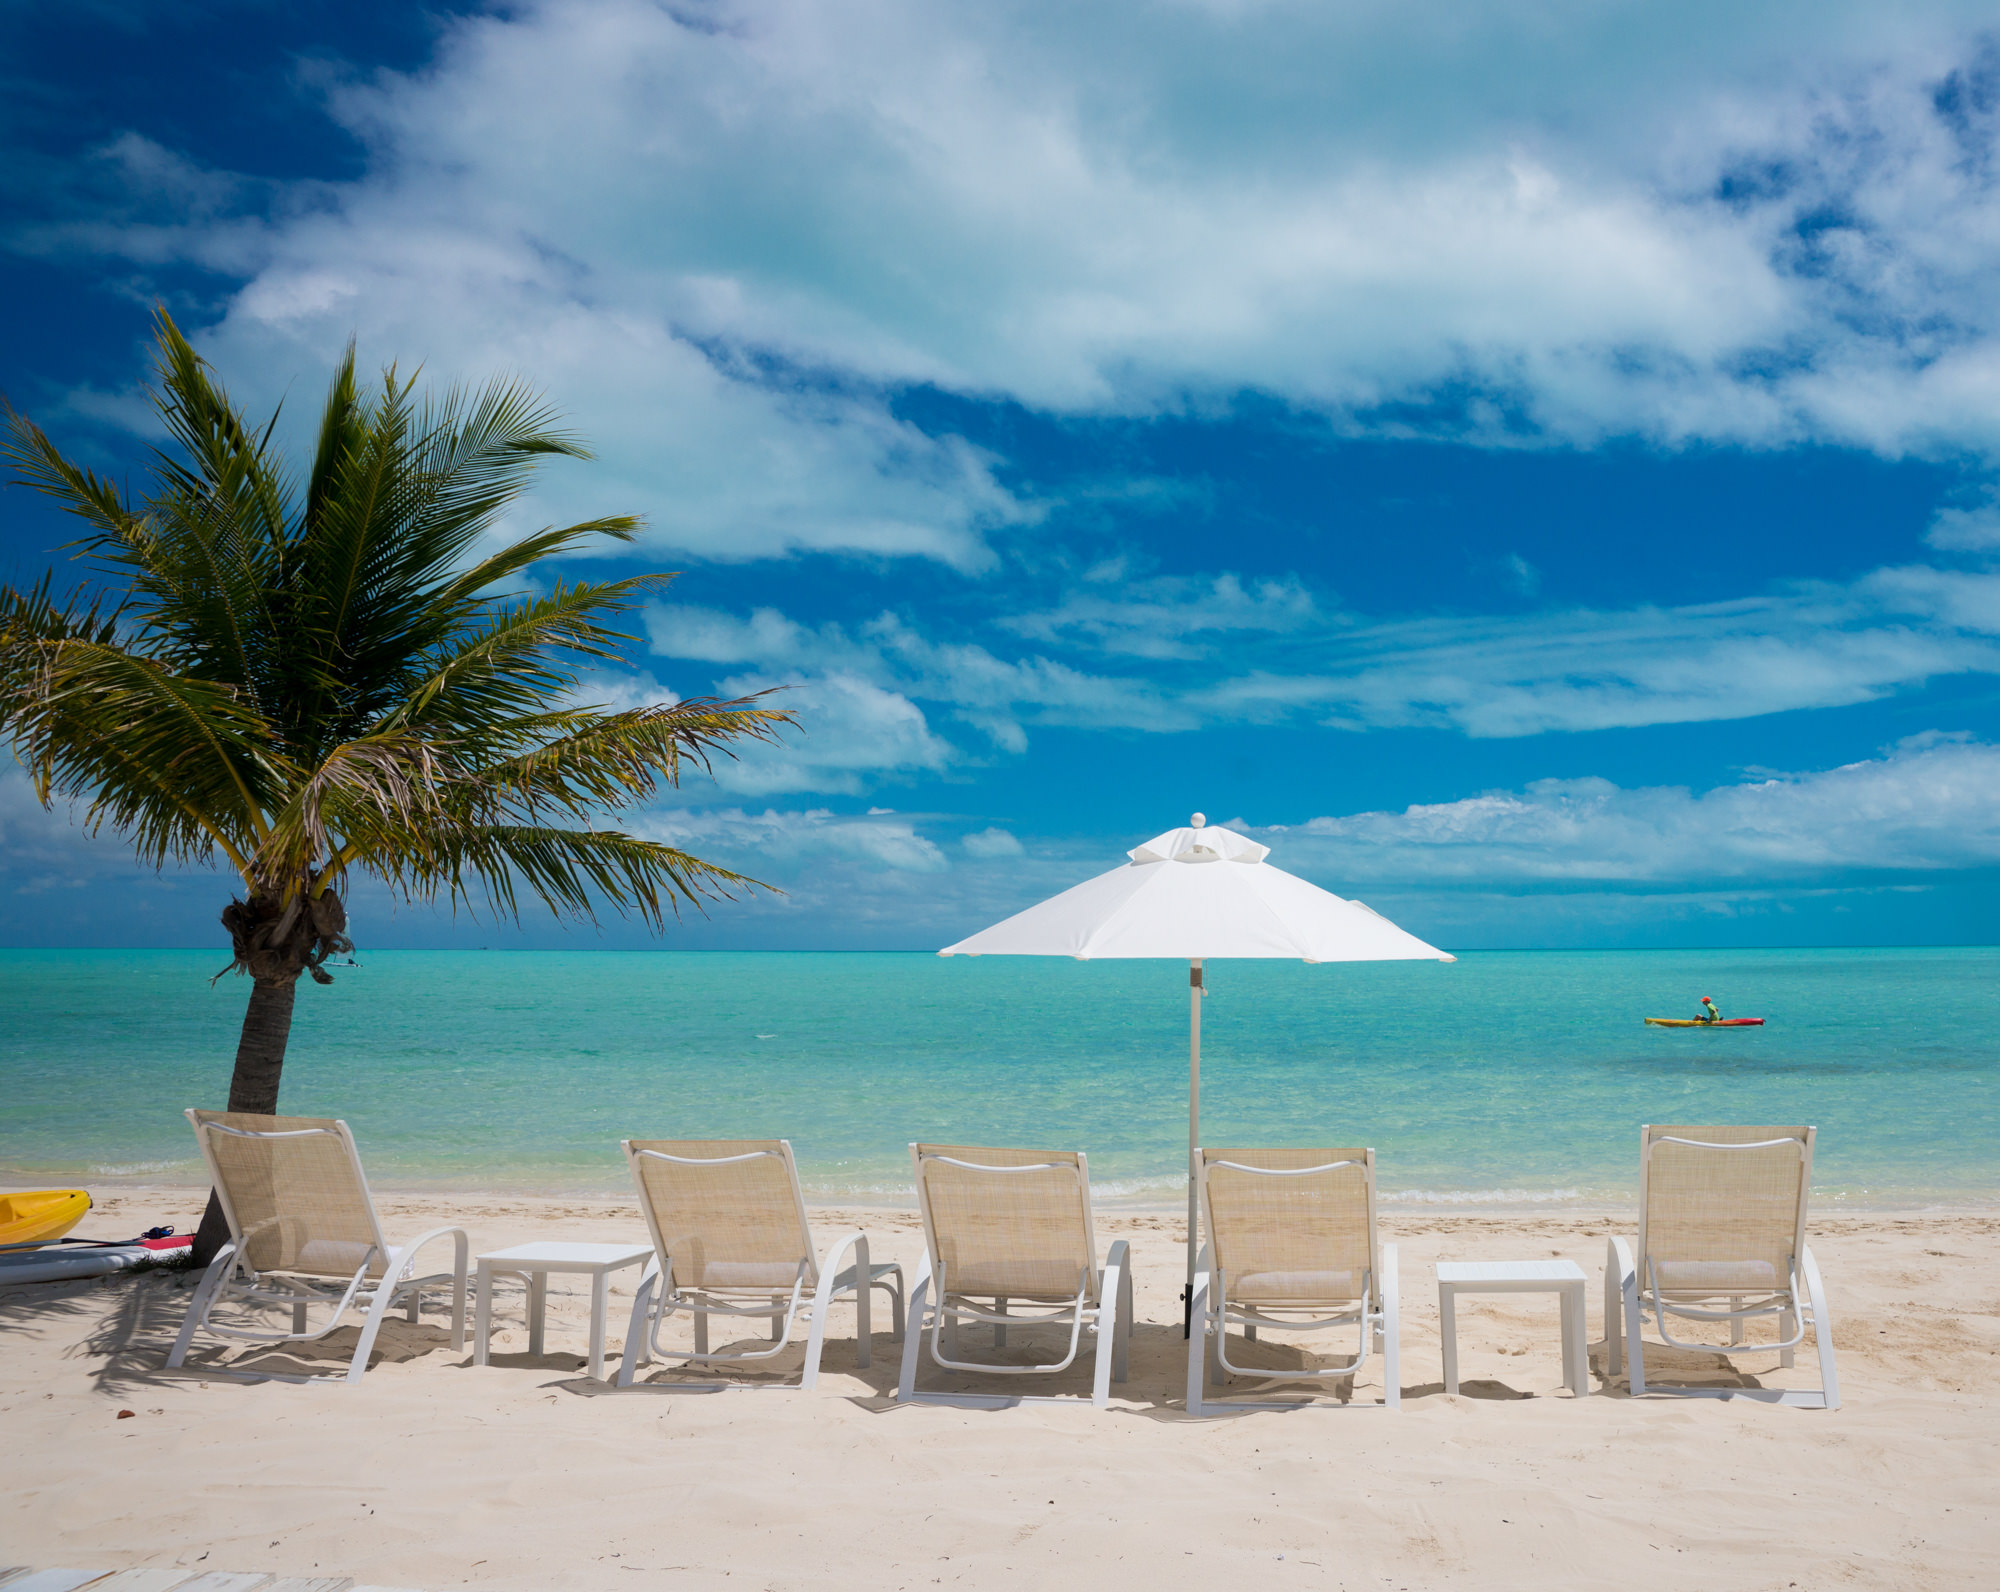 Take a Trip to Tranquil Turks and Caicos